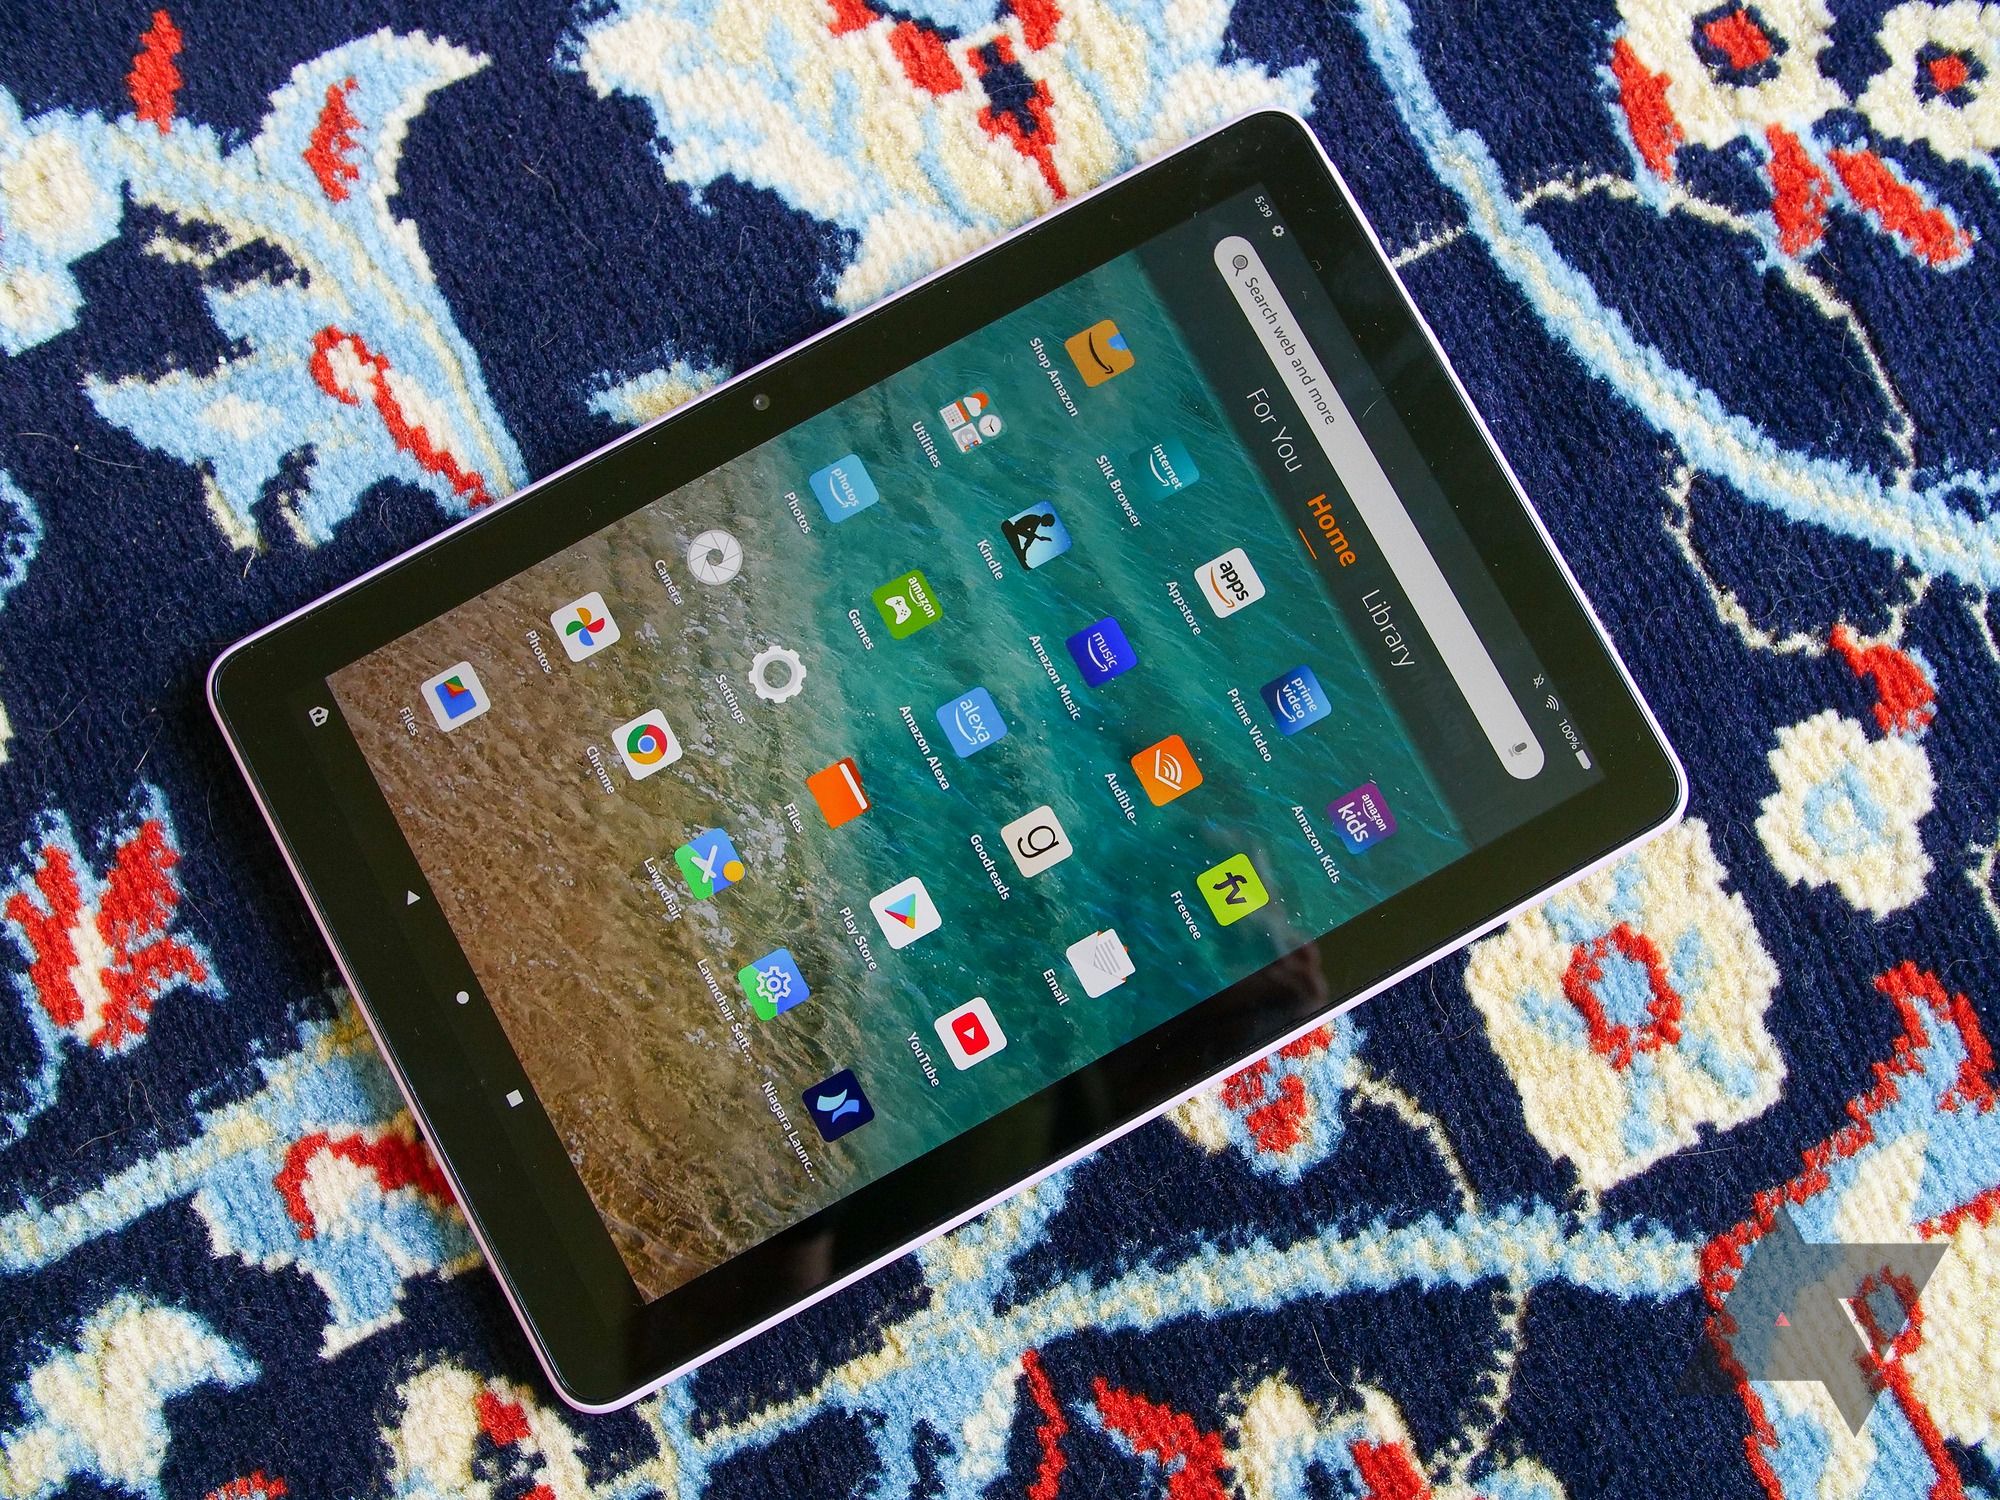 Should you buy an Amazon Fire tablet with lockscreen ads?